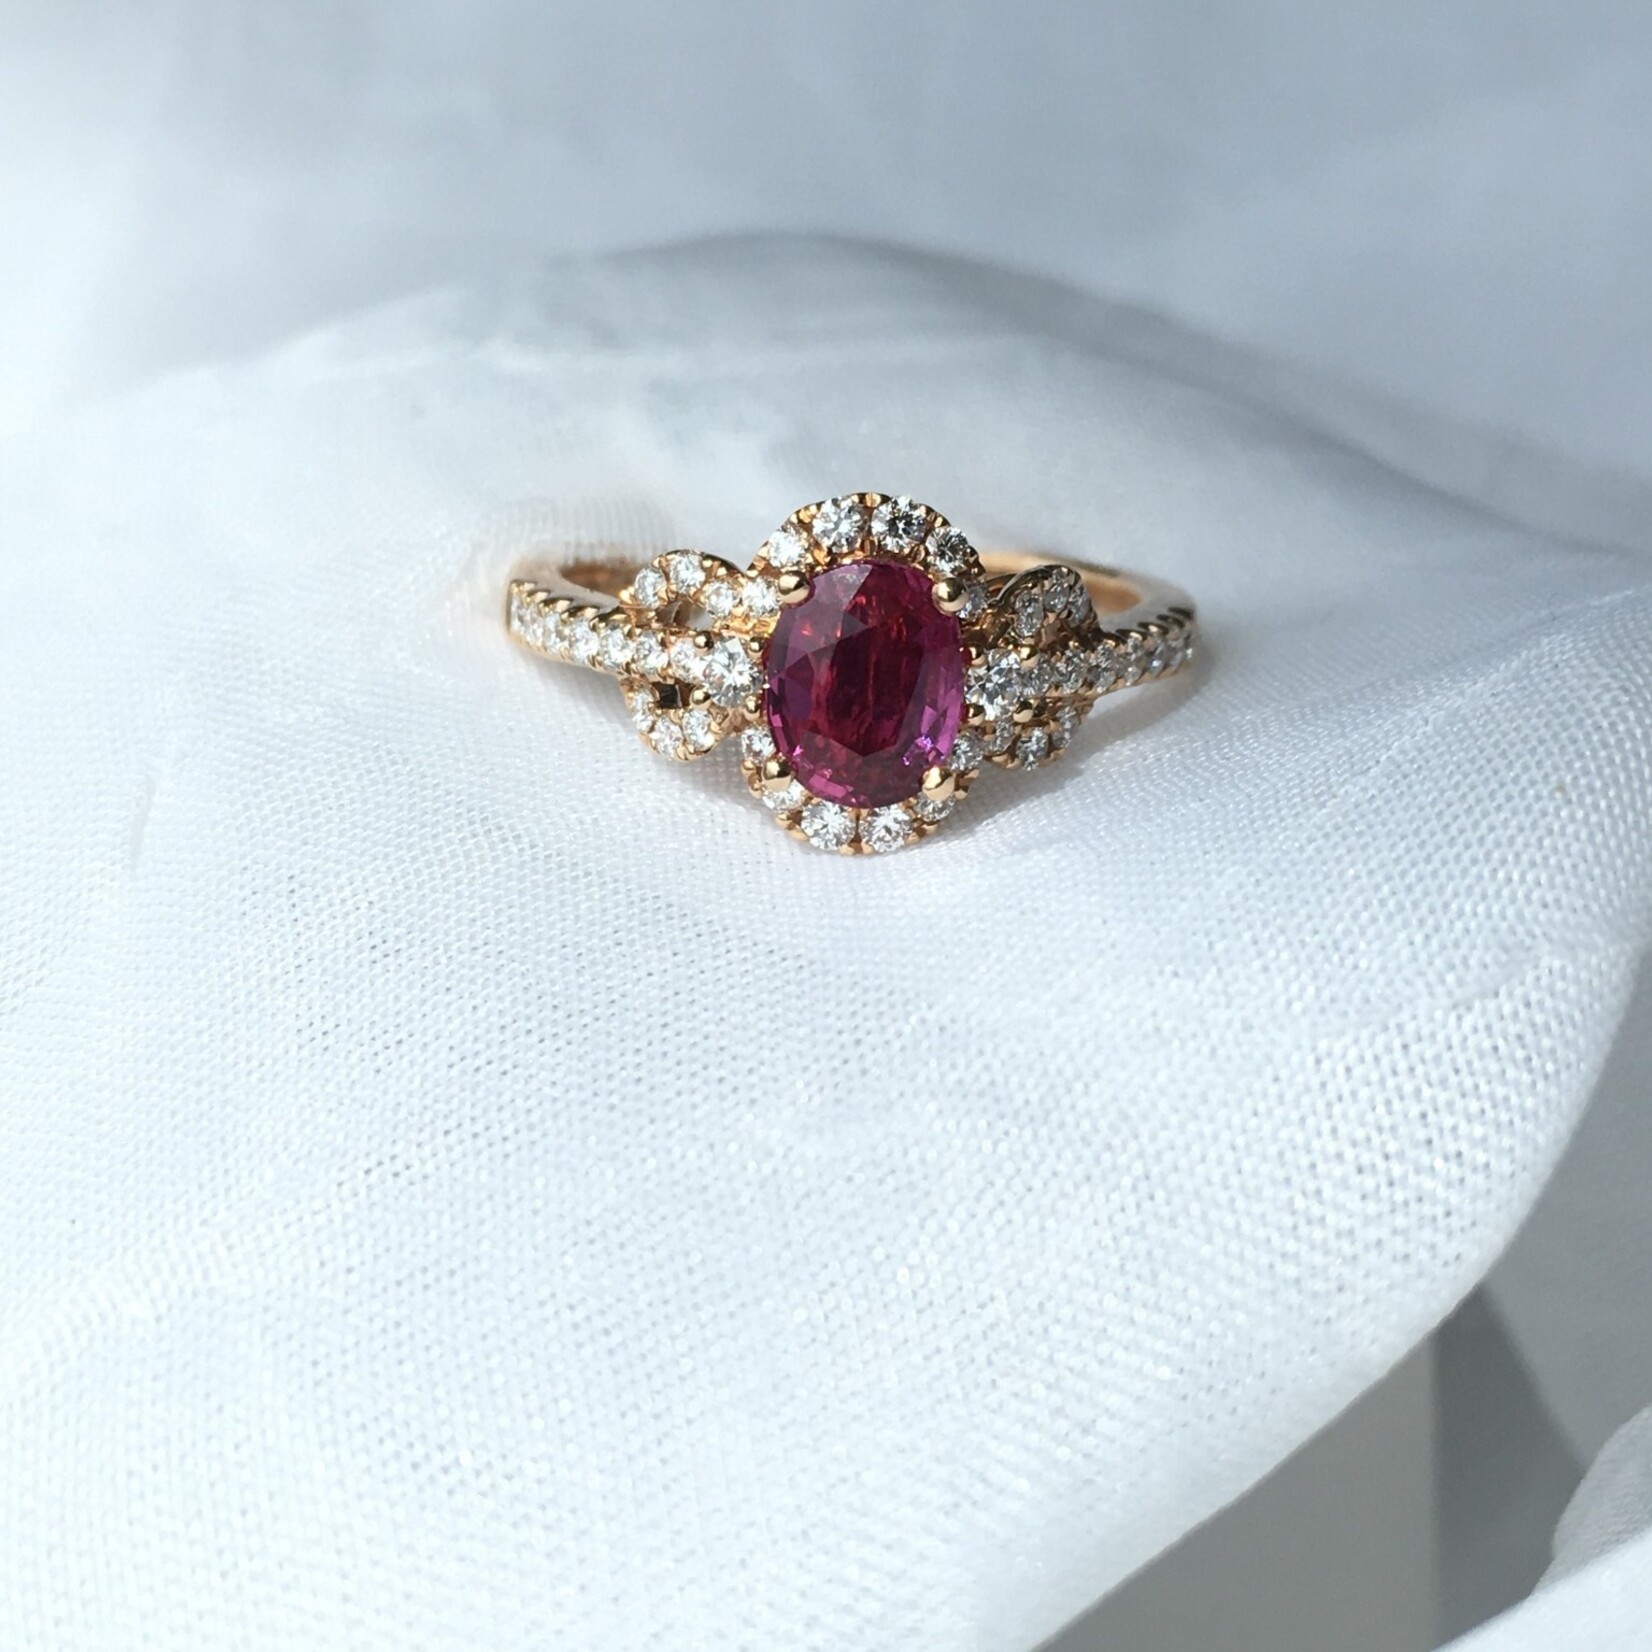 Franklin Jewelers 18kt R 0.89ct Ruby and 0.39ct Diamond Ring